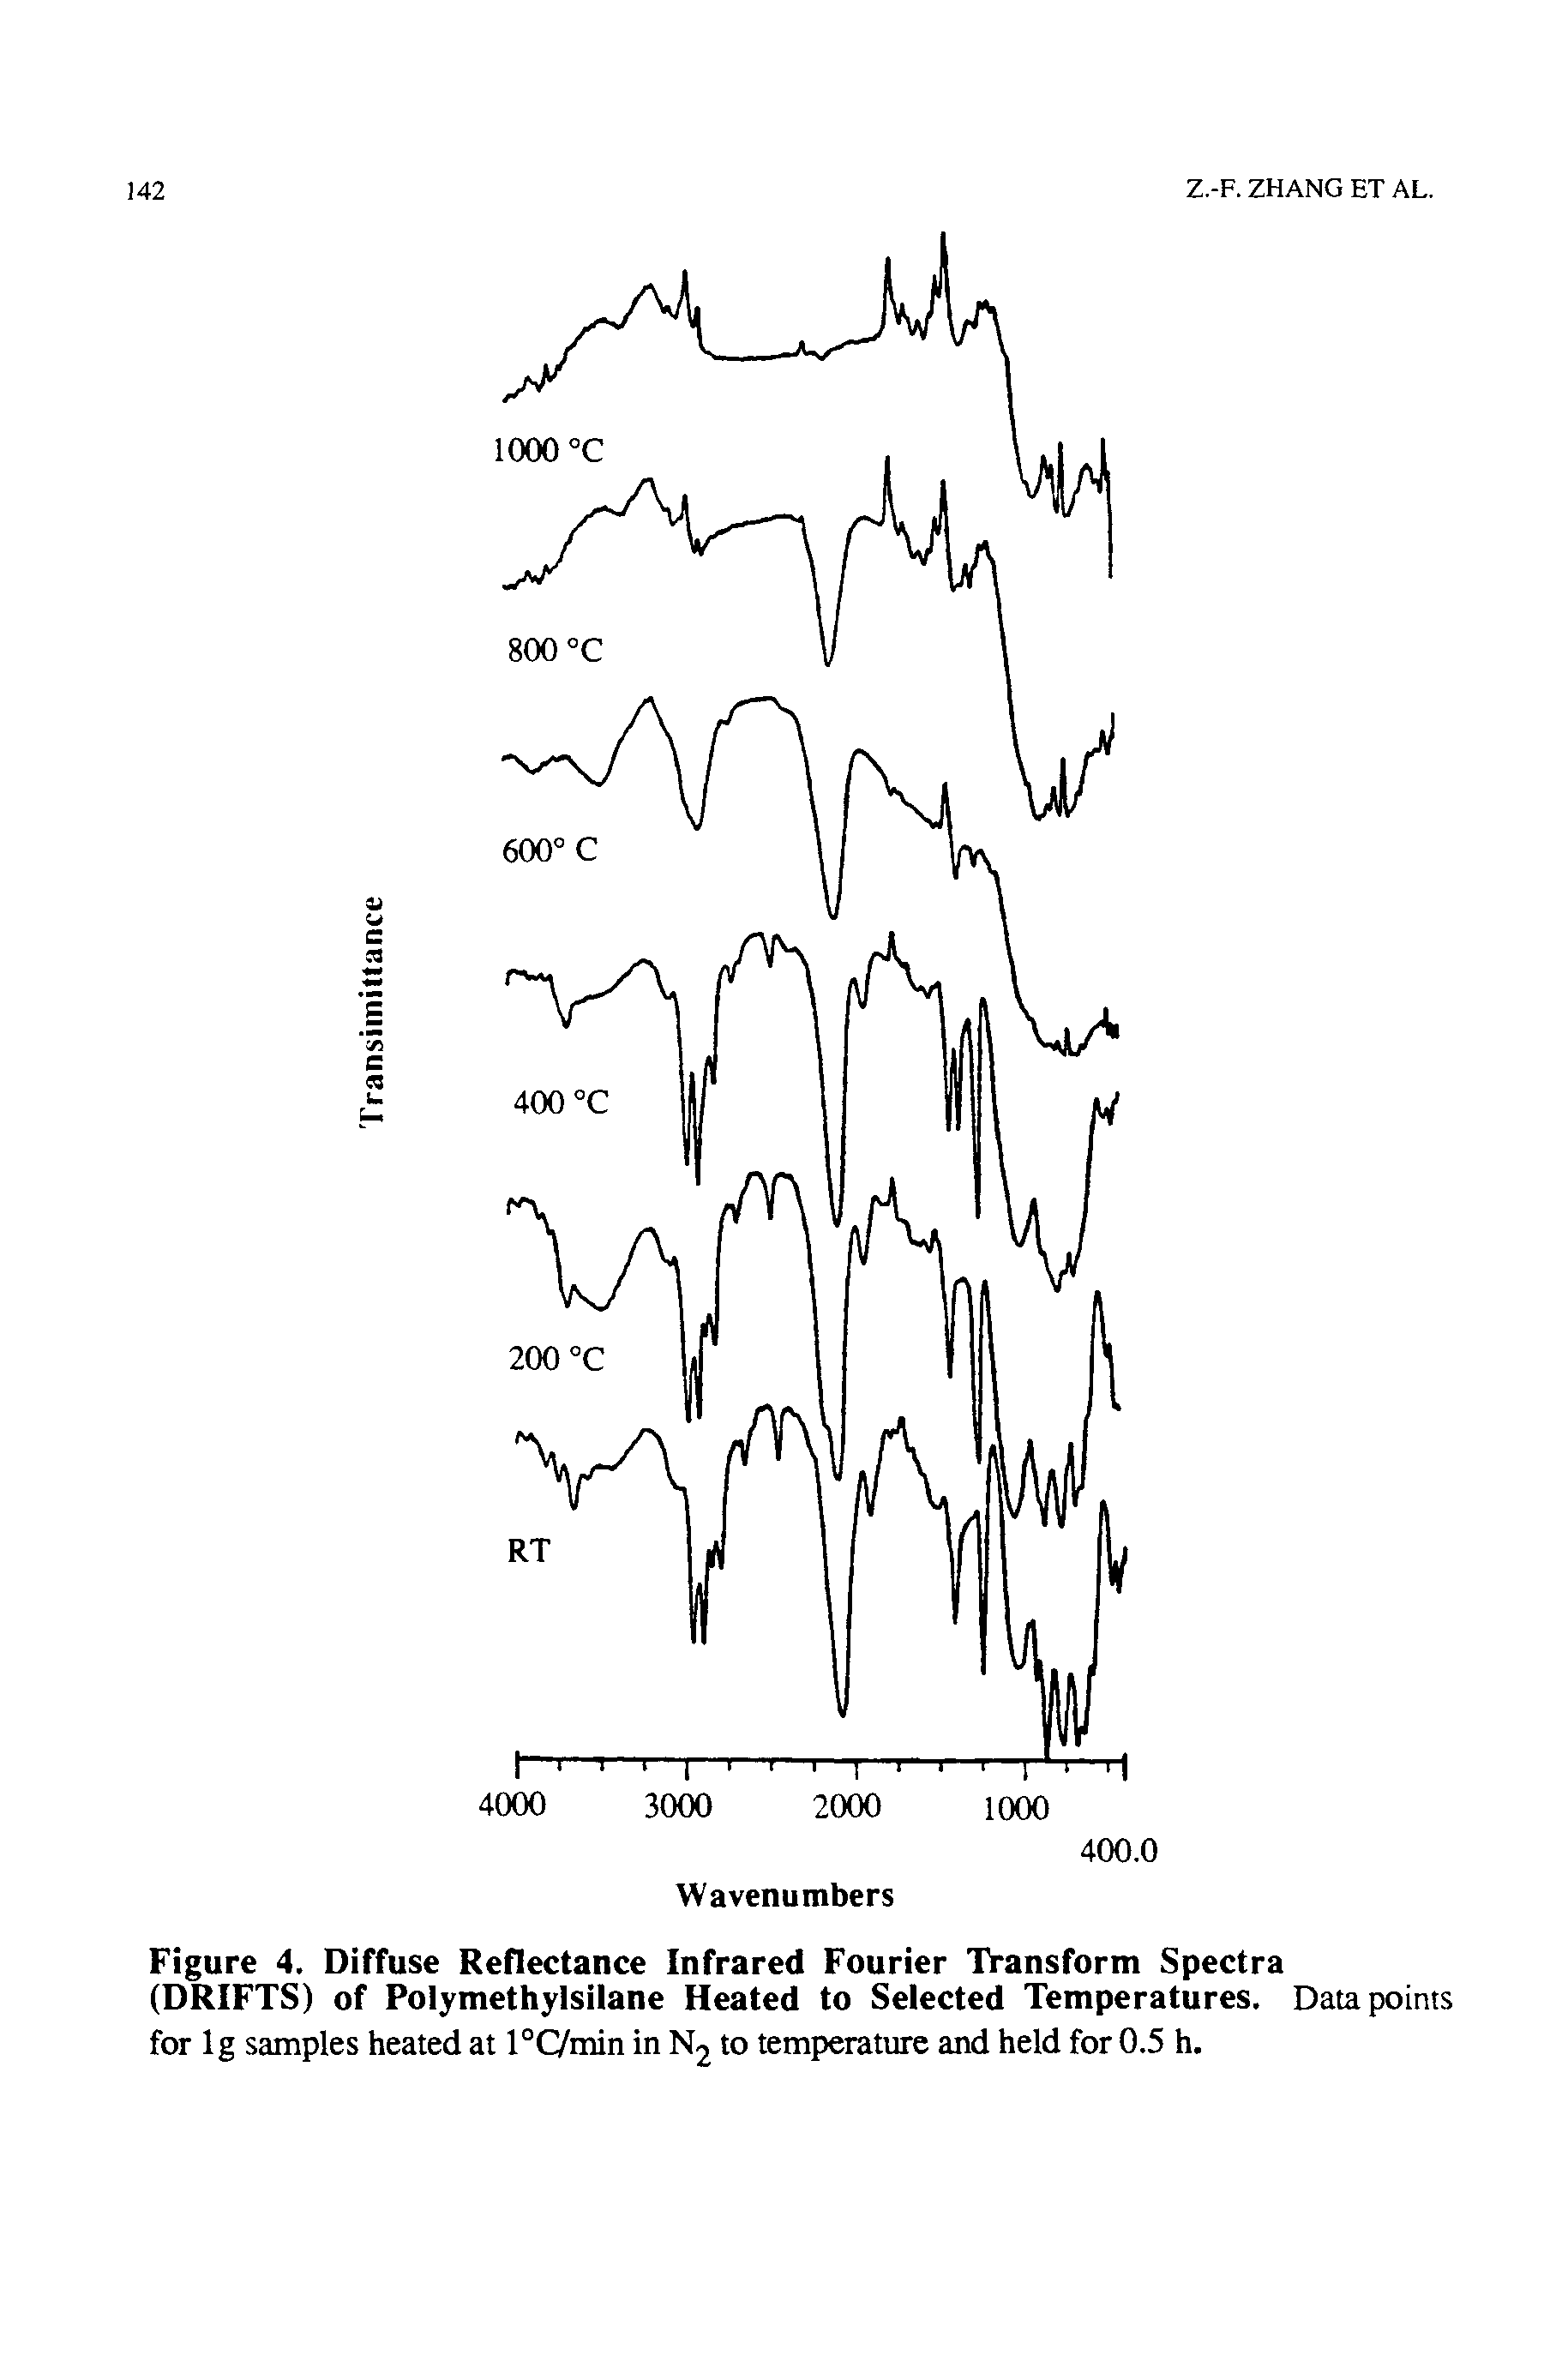 Figure 4. Diffuse Reflectance Infrared Fourier Transform Spectra (DRIFTS) of Polymethylsilane Heated to Selected Temperatures. Data points for Ig samples heated at l°C/min in N2 to temperature and held for 0.5 h.